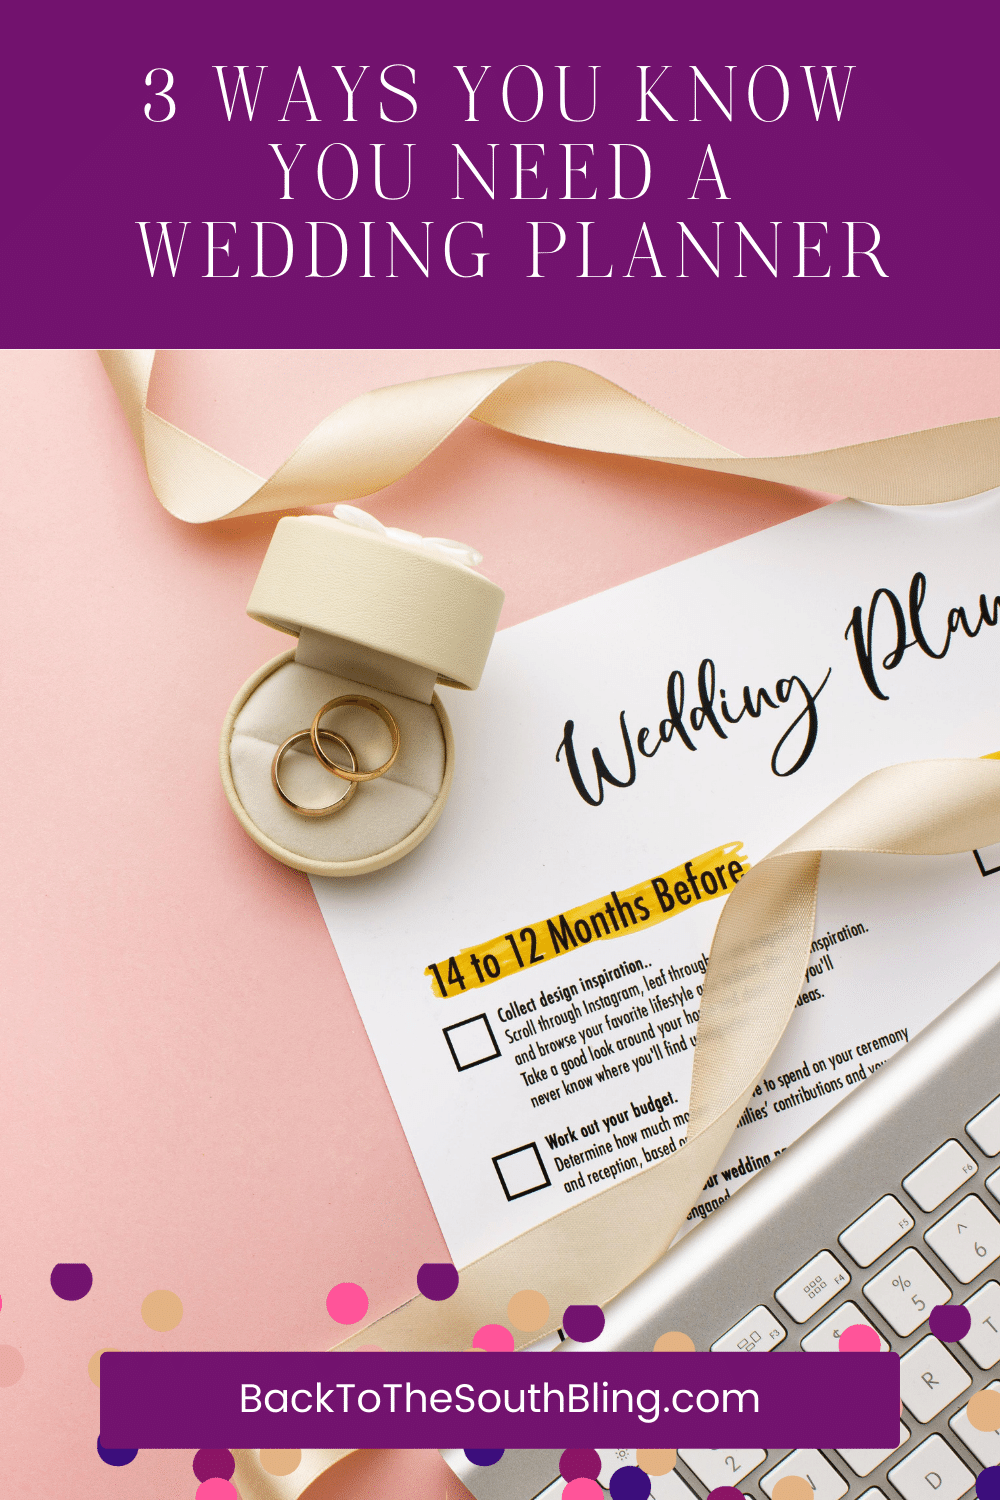 3 Ways You Know It's Time to Hire a Wedding Planner